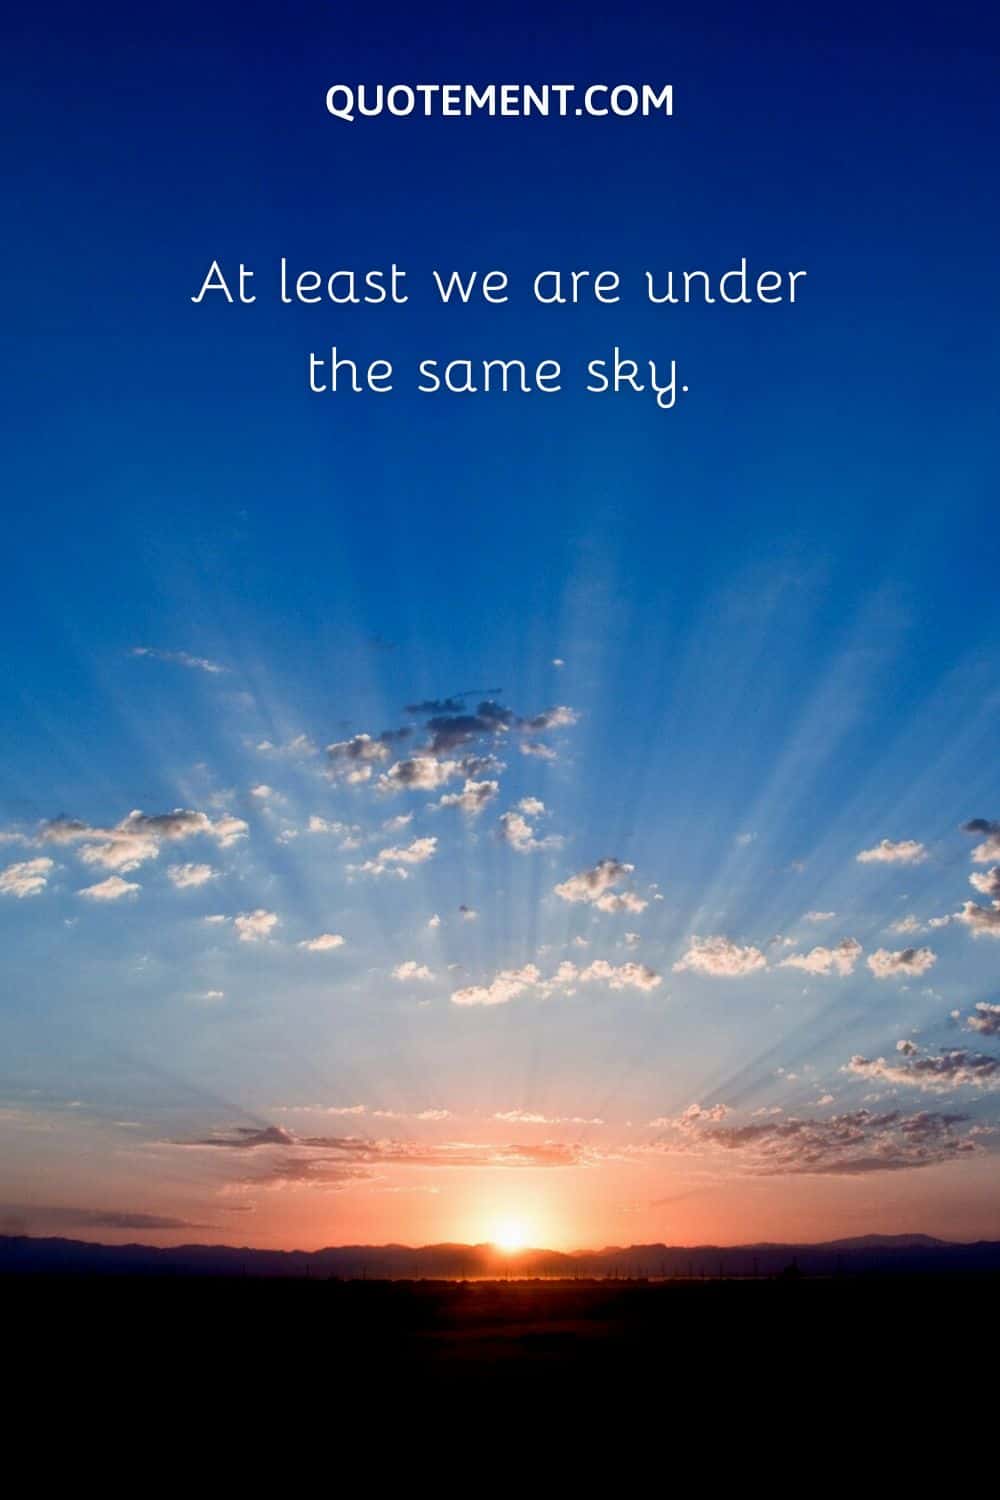 At least we are under the same sky.